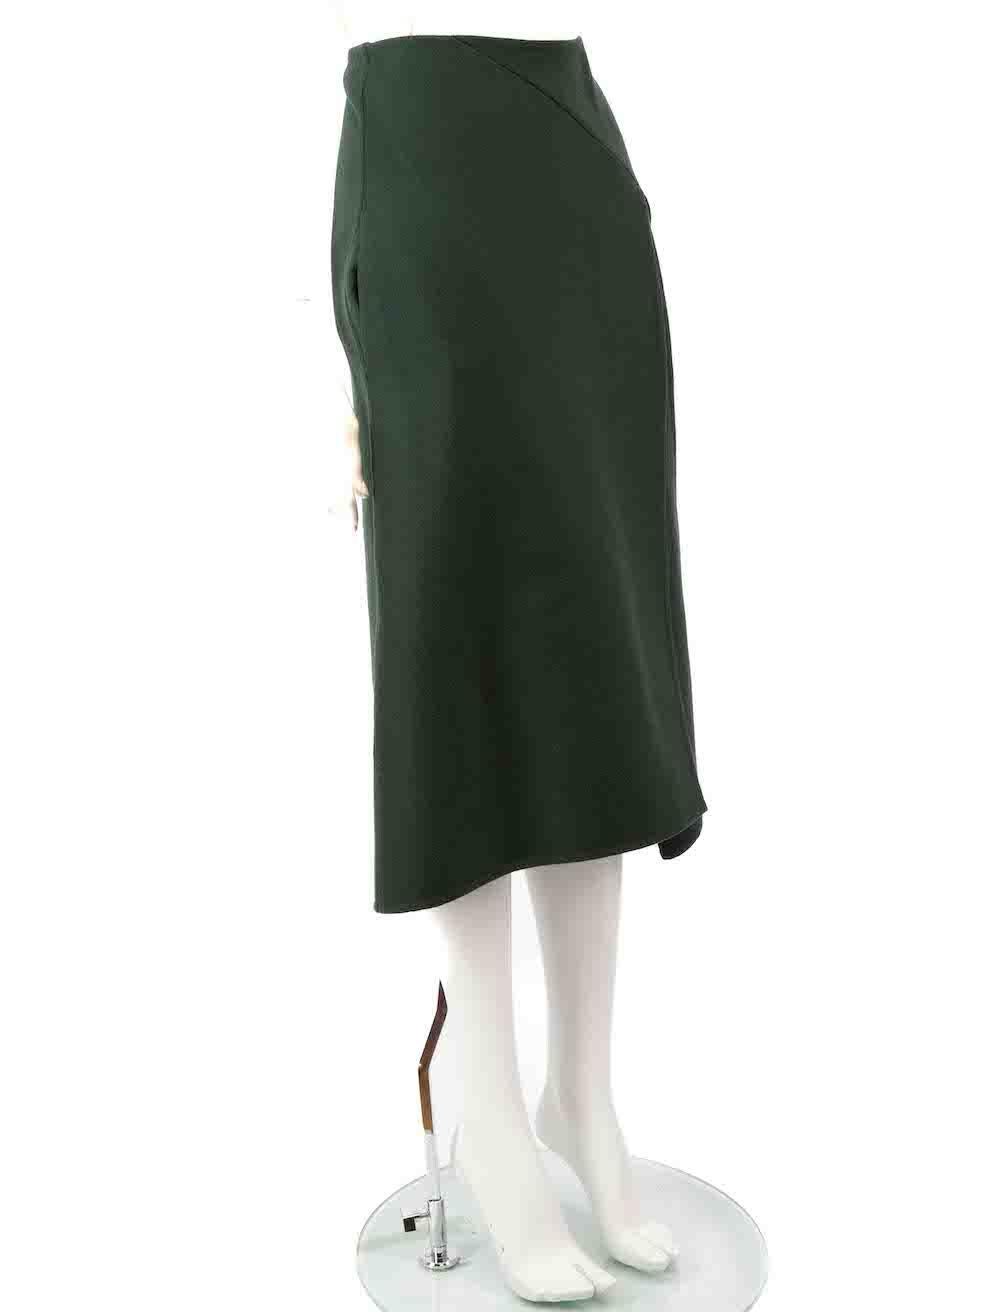 CONDITION is Very good. Hardly any visible wear to the skirt is evident. However, due to poor storage, there is a mark on the brand label on this used Céline designer resale item.
 
 
 
 Details
 
 
 Green
 
 Wool
 
 Skirt
 
 A-line
 
 Midi
 
 Front